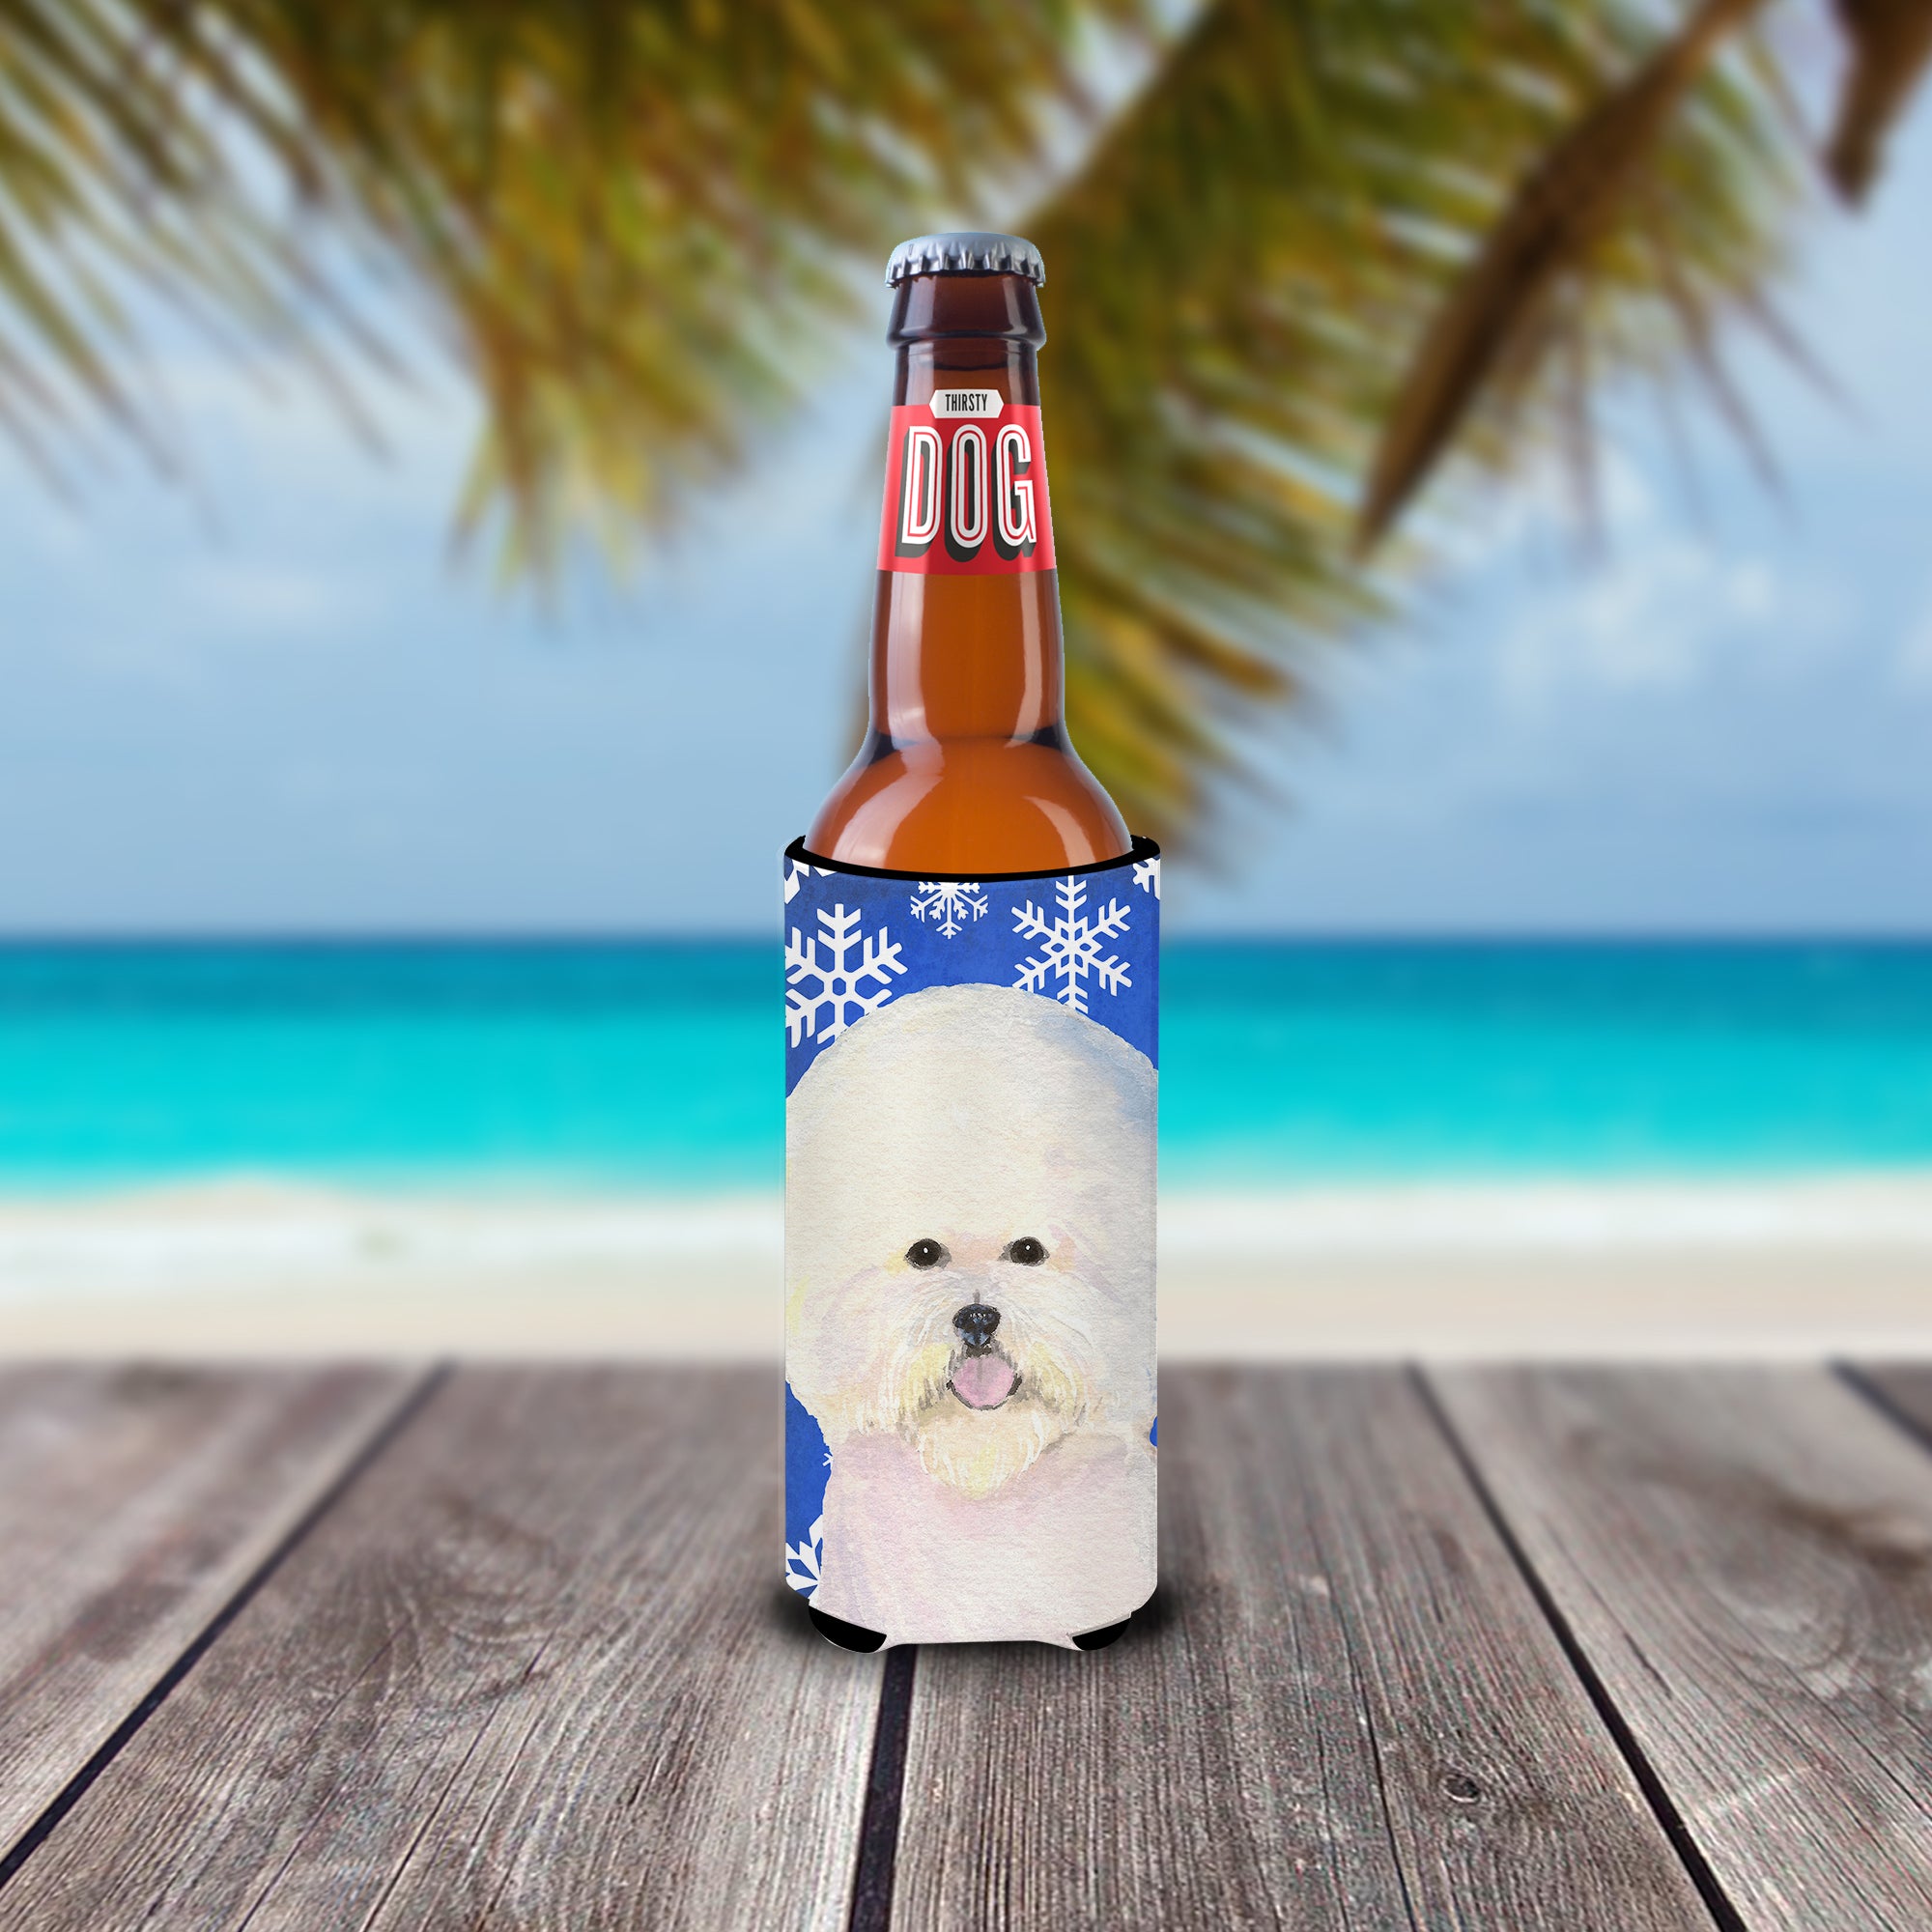 Bichon Frise Winter Snowflakes Holiday Ultra Beverage Insulators for slim cans SS4664MUK.